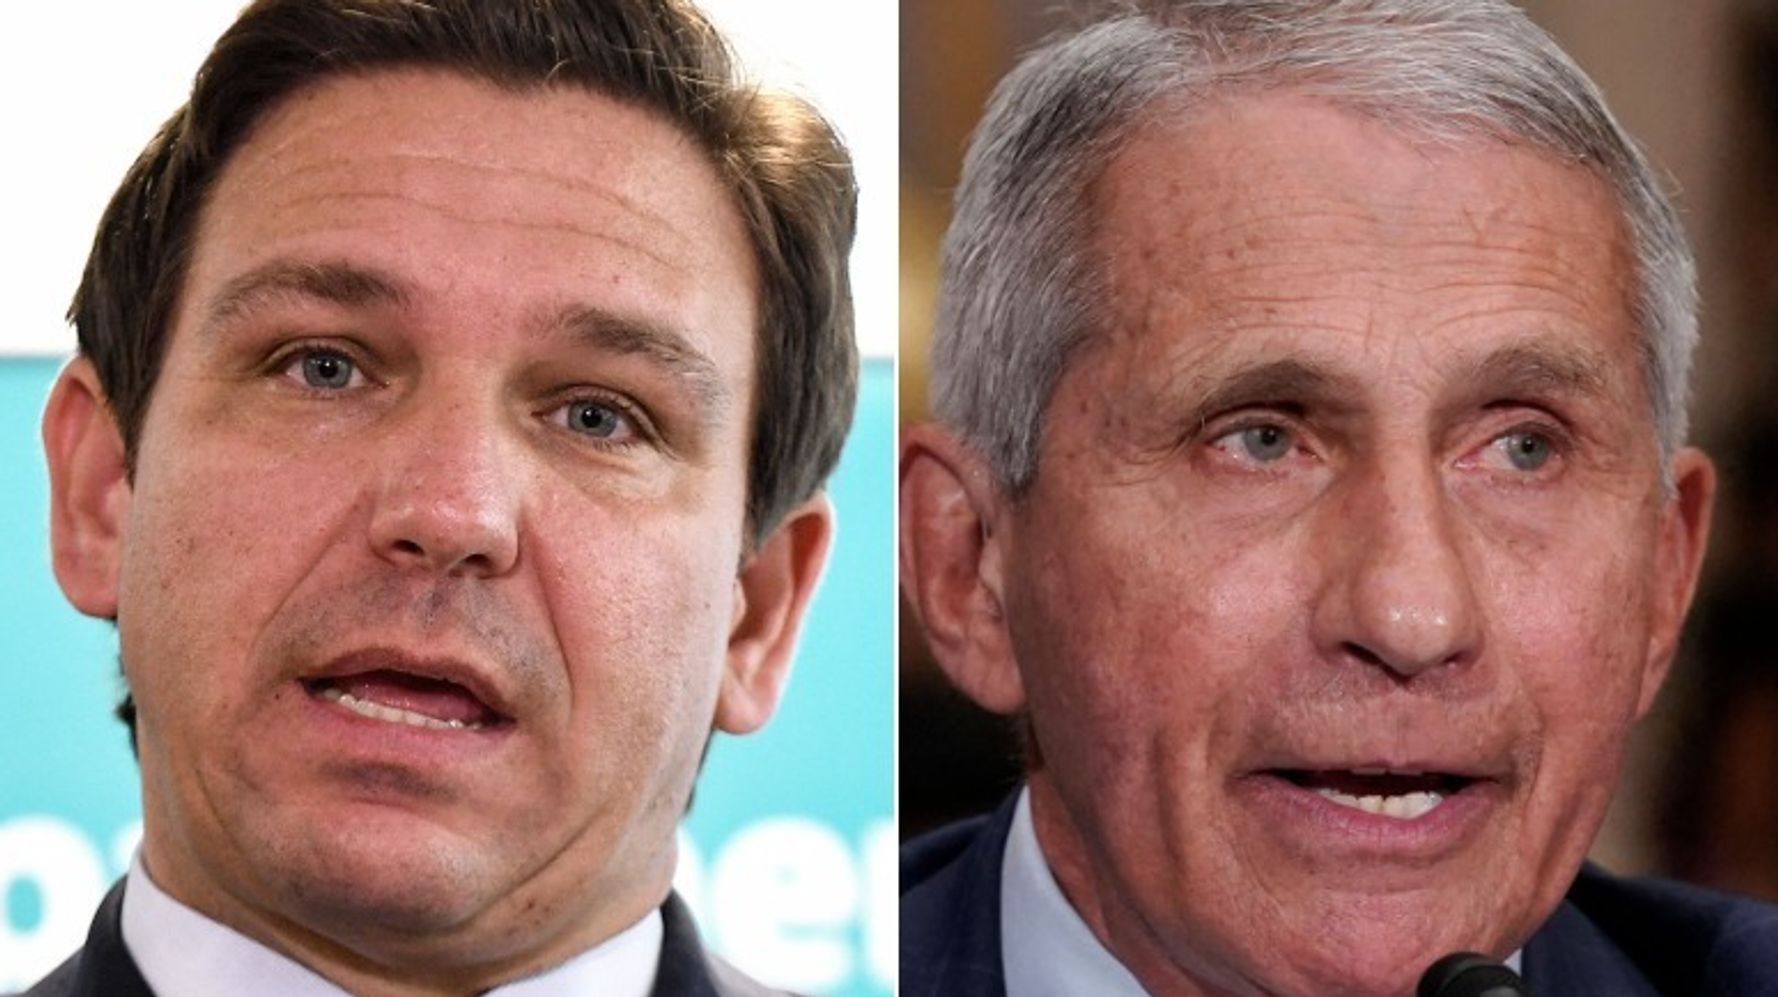 DeSantis Gets Vital History Lesson From Fauci Over 'Completely Incorrect' Vaccine Claim